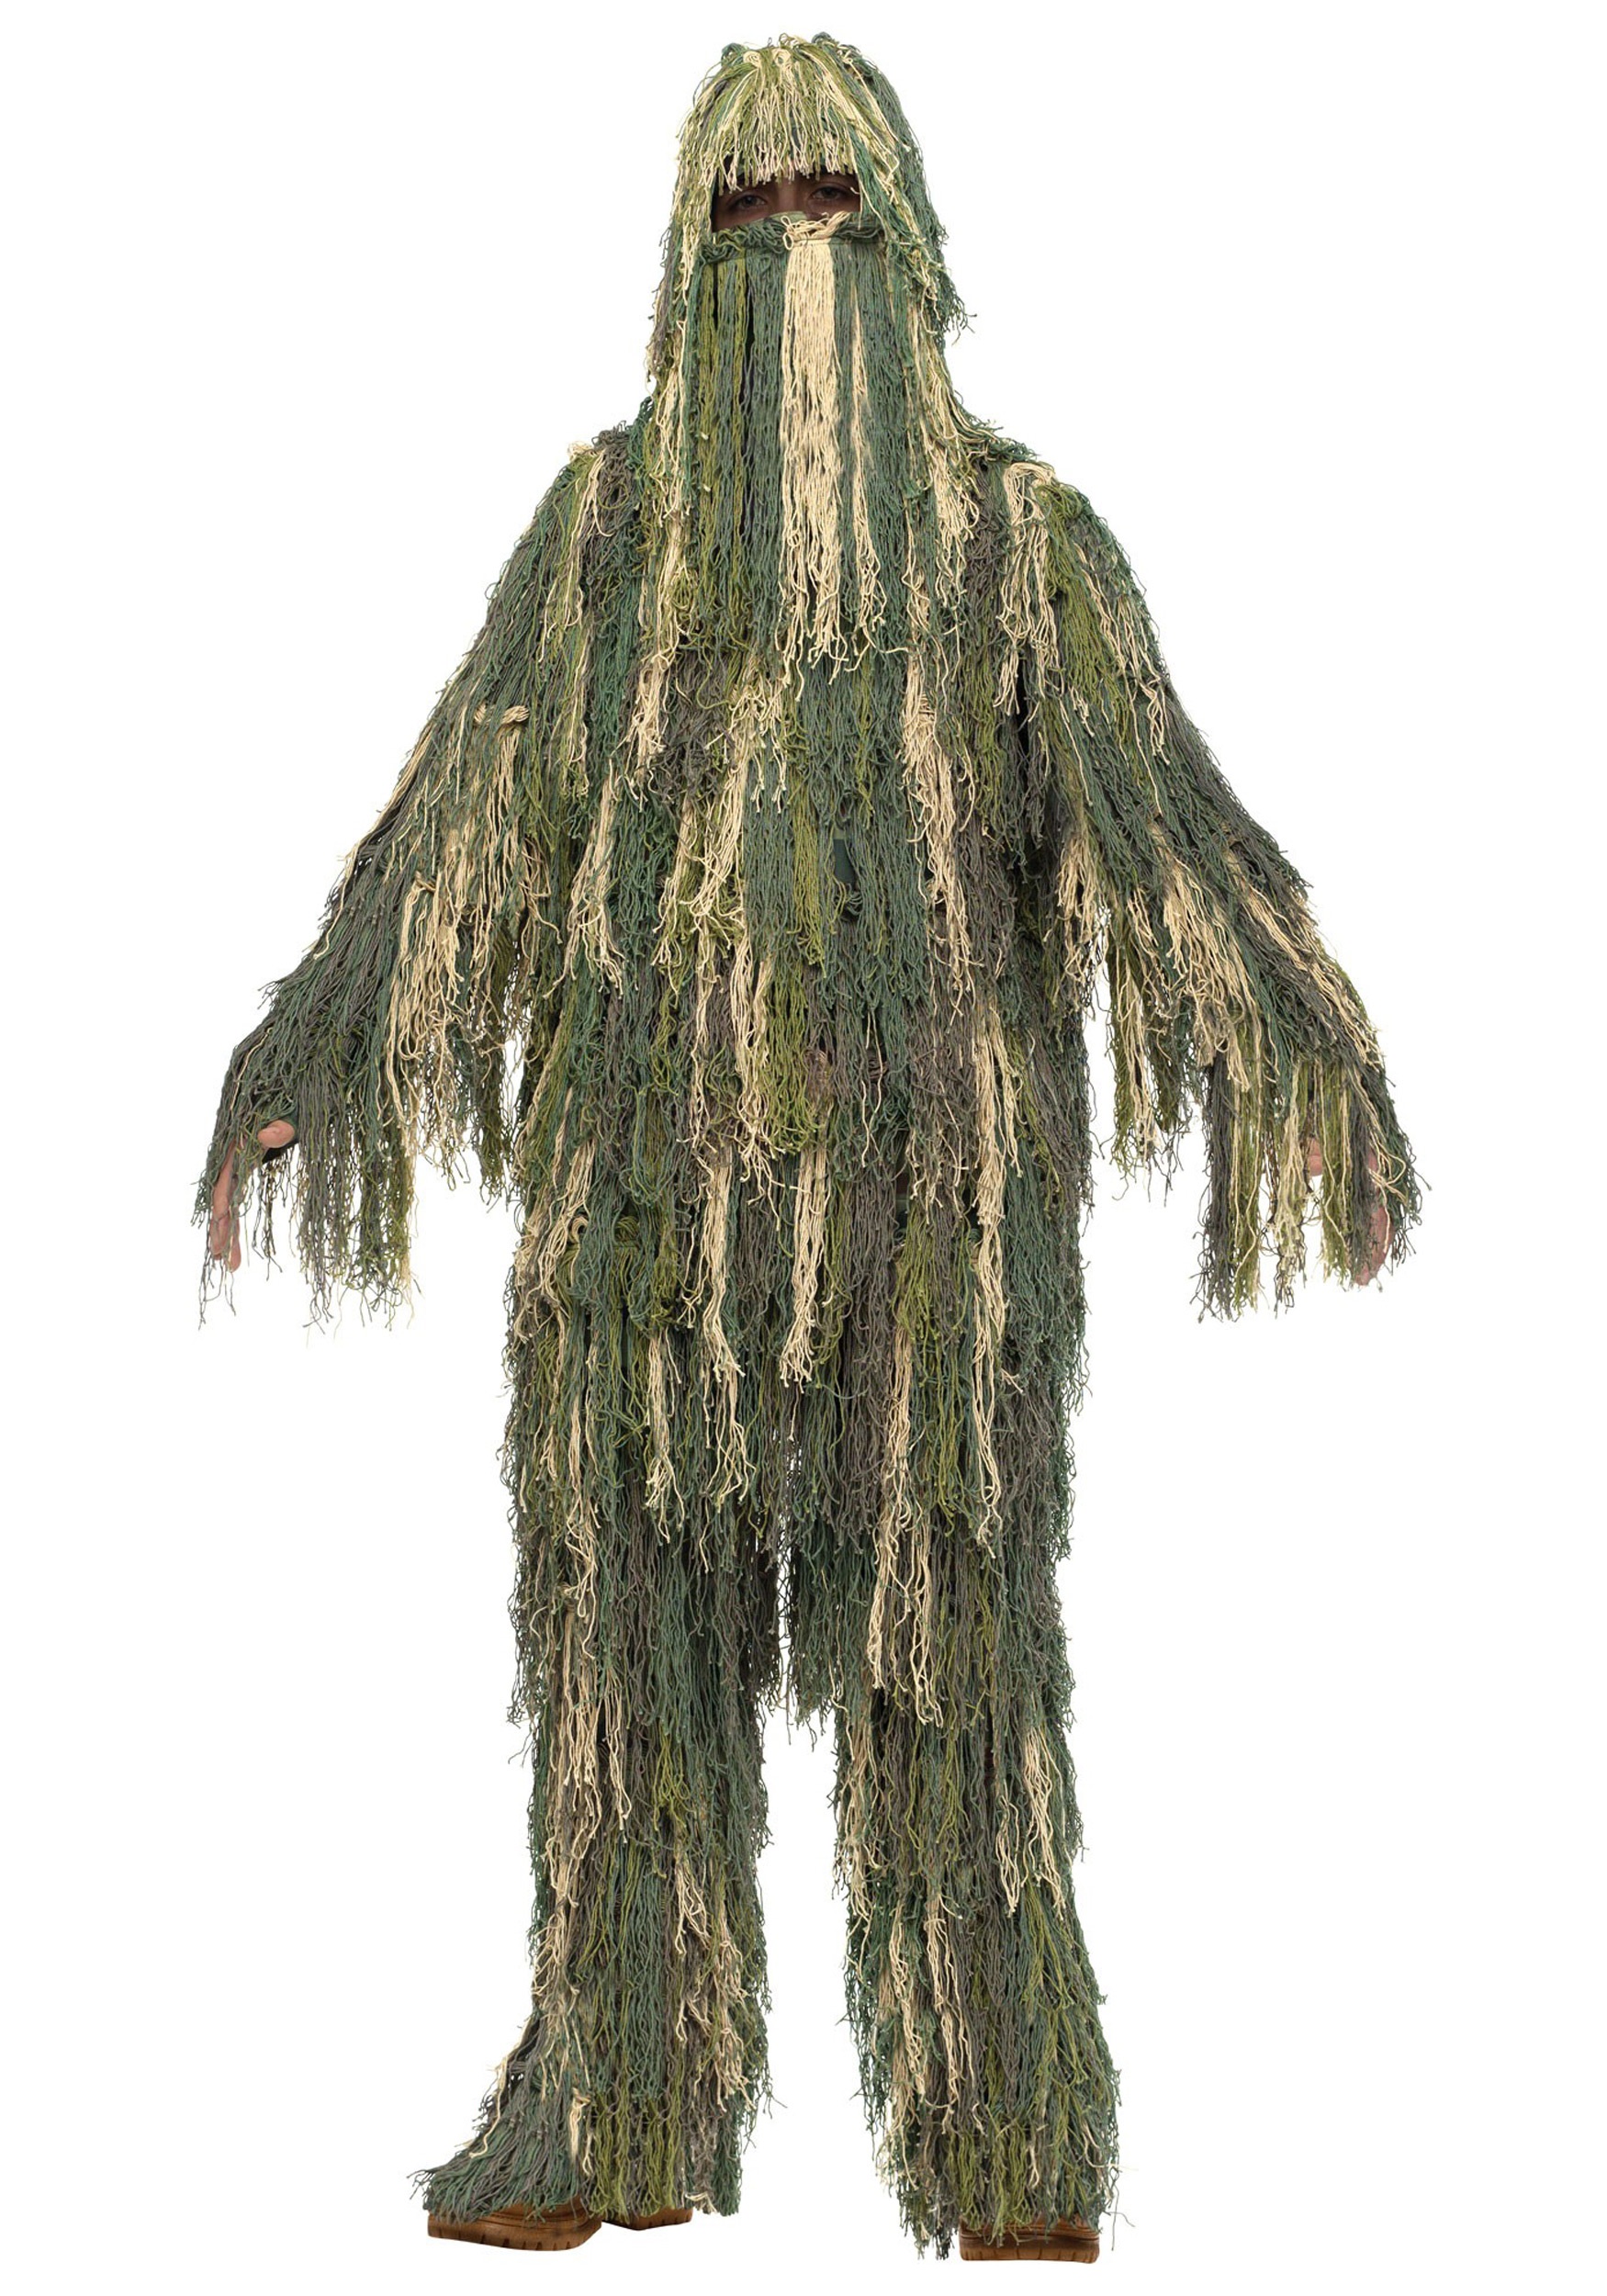 Photos - Fancy Dress Fun World Ghillie Suit For Kids | Kid's Costumes Green FU131532